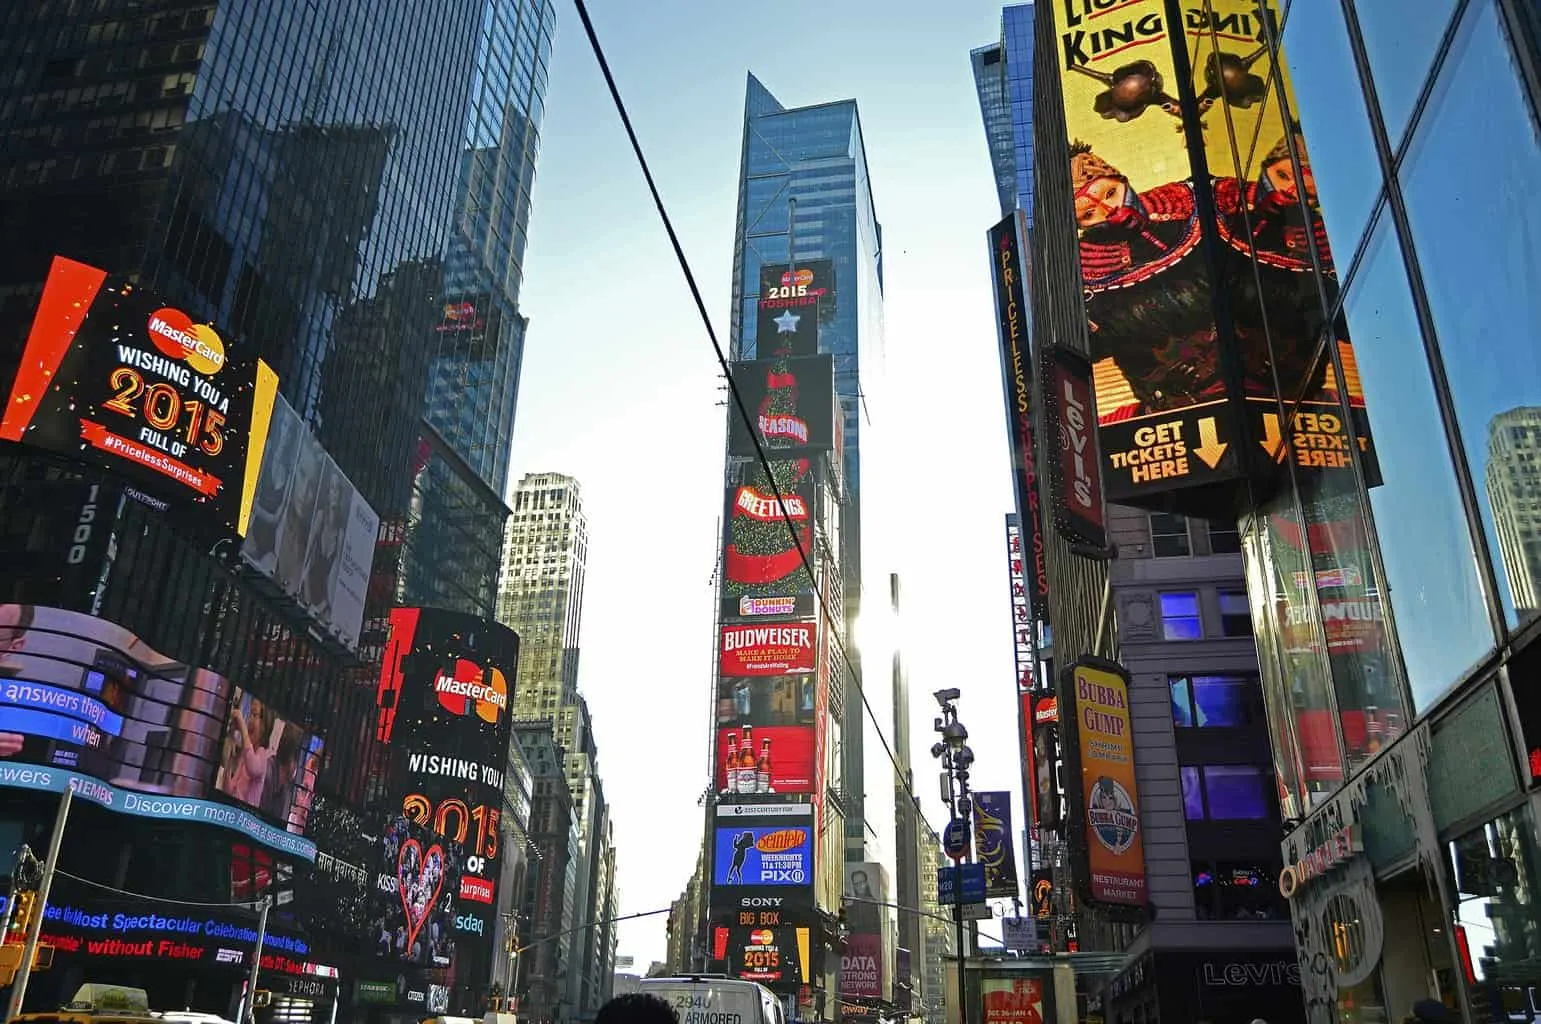 The bright lights and Broadway posters that you'll find throughout Times Square.